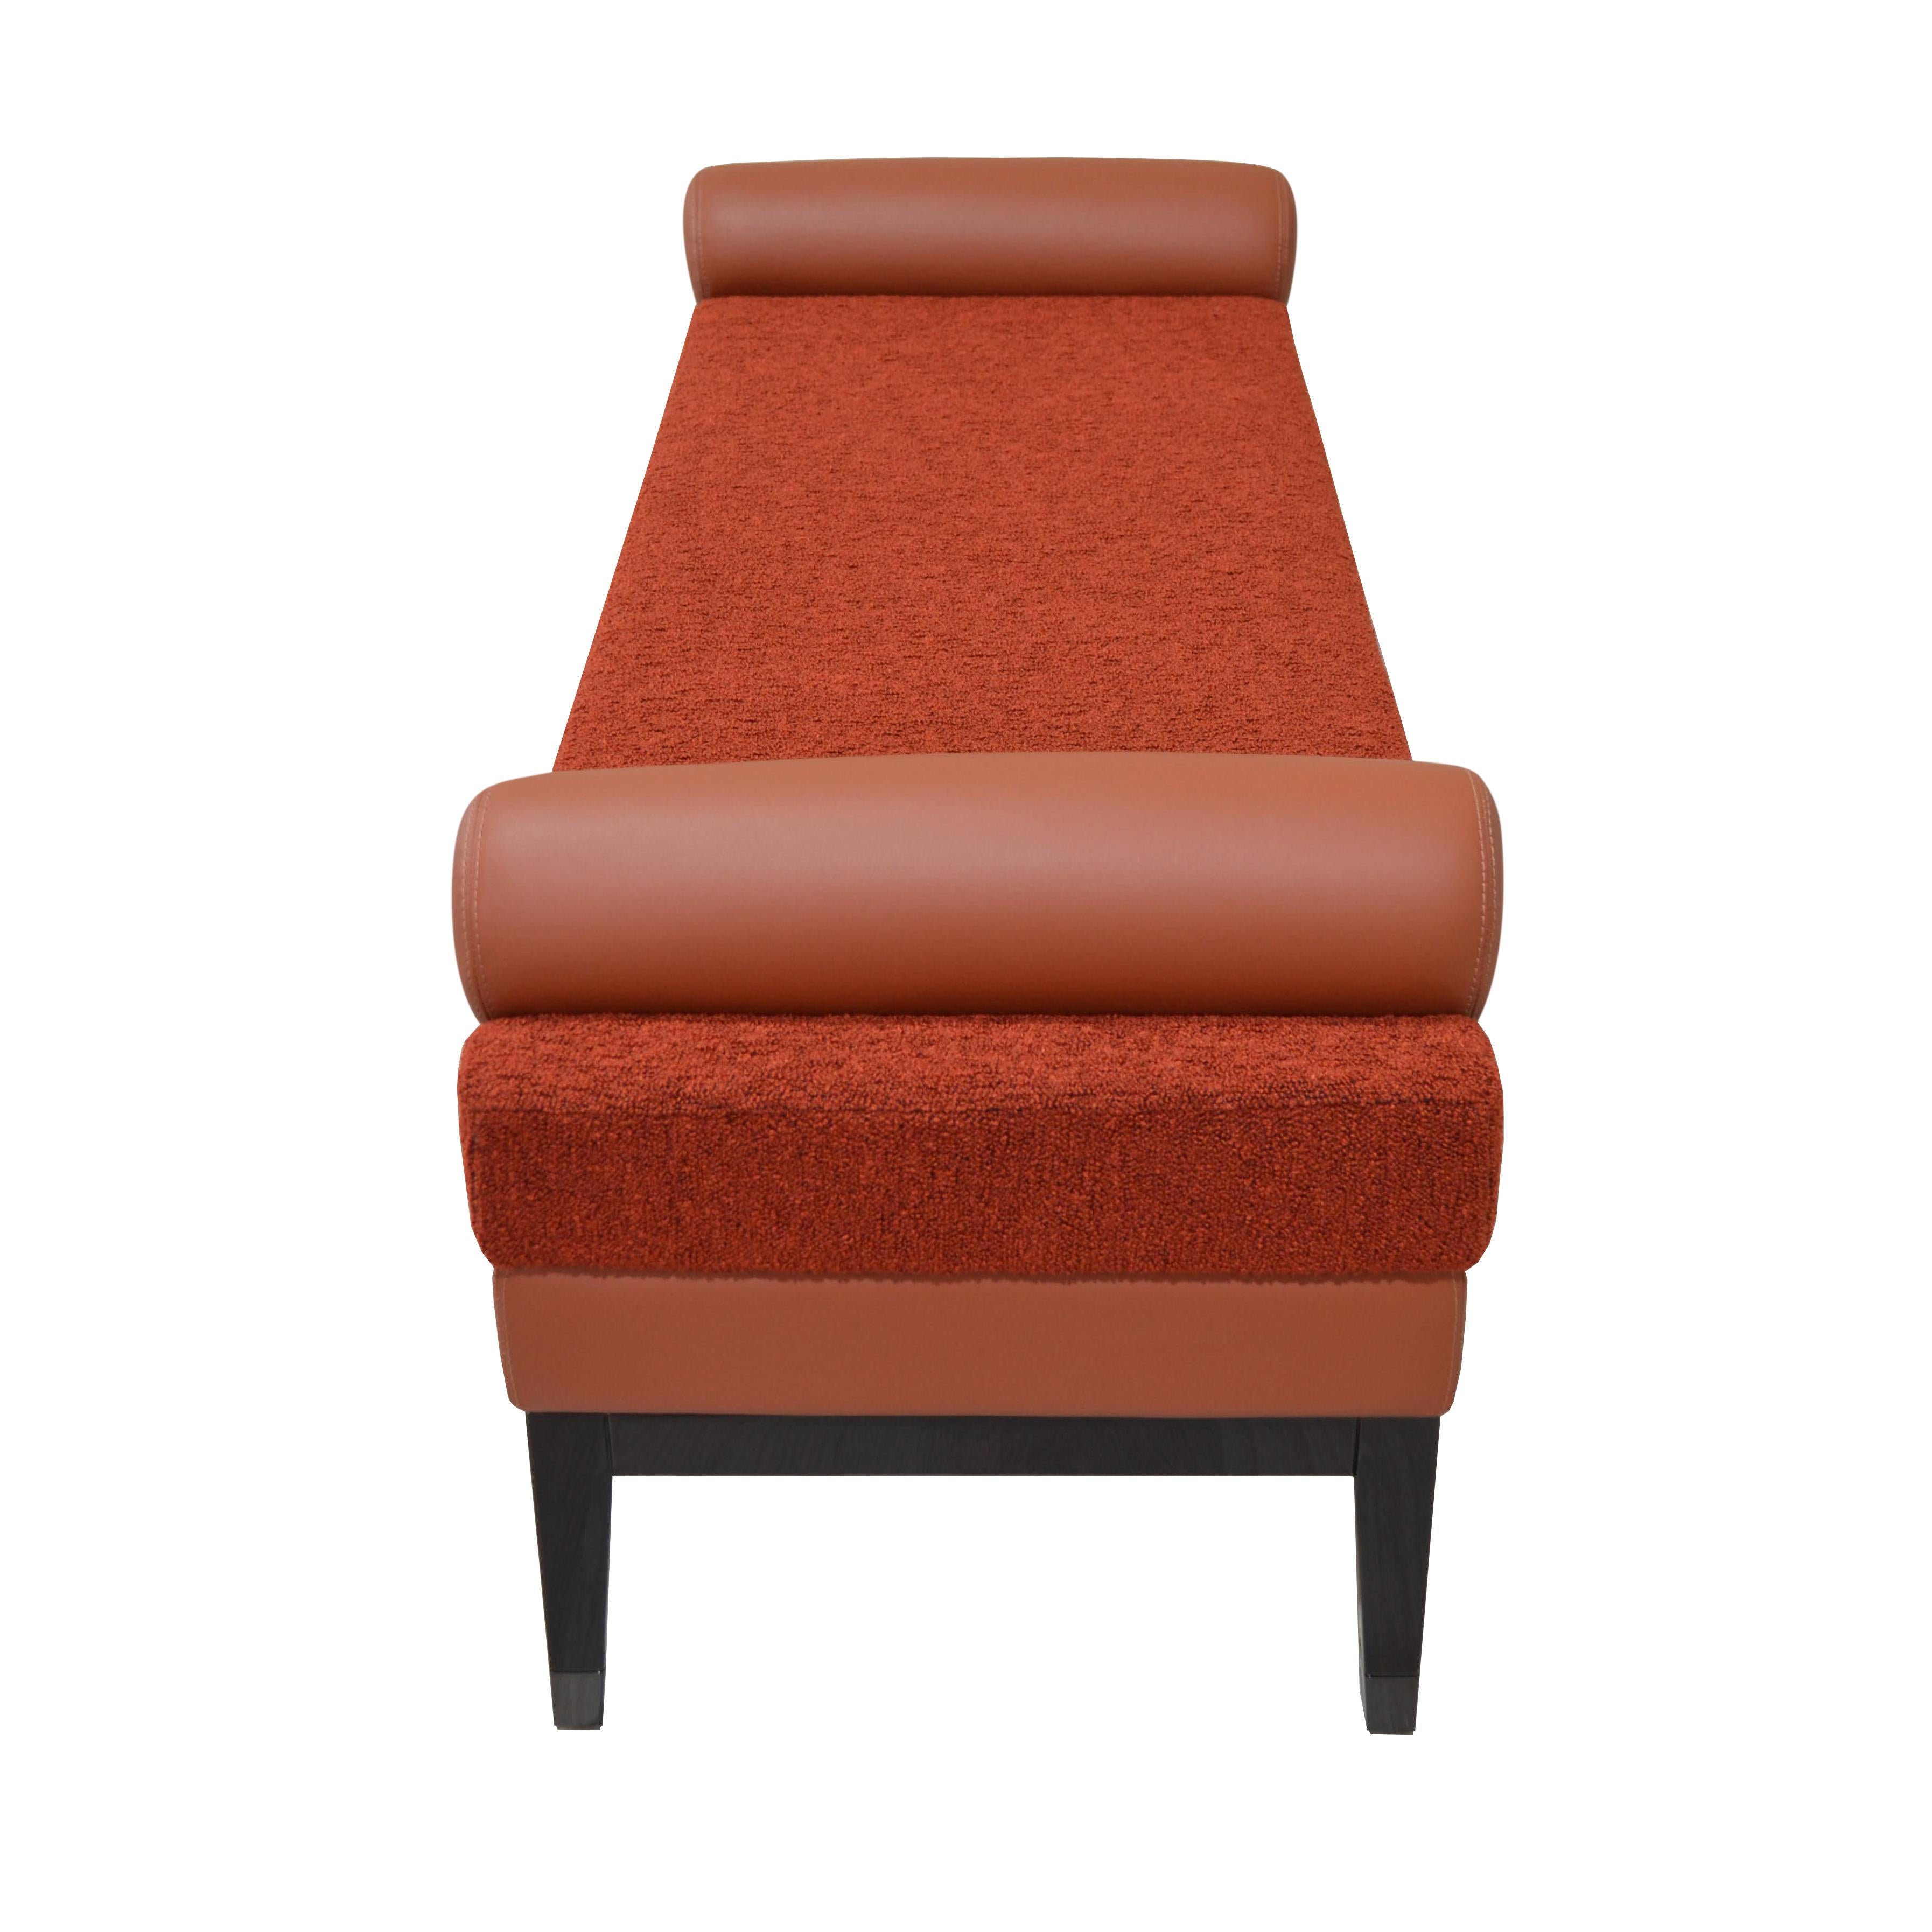 Art Deco Italian Contemporary Upholstered Bench in Terracotta Fabric and Red Leather For Sale